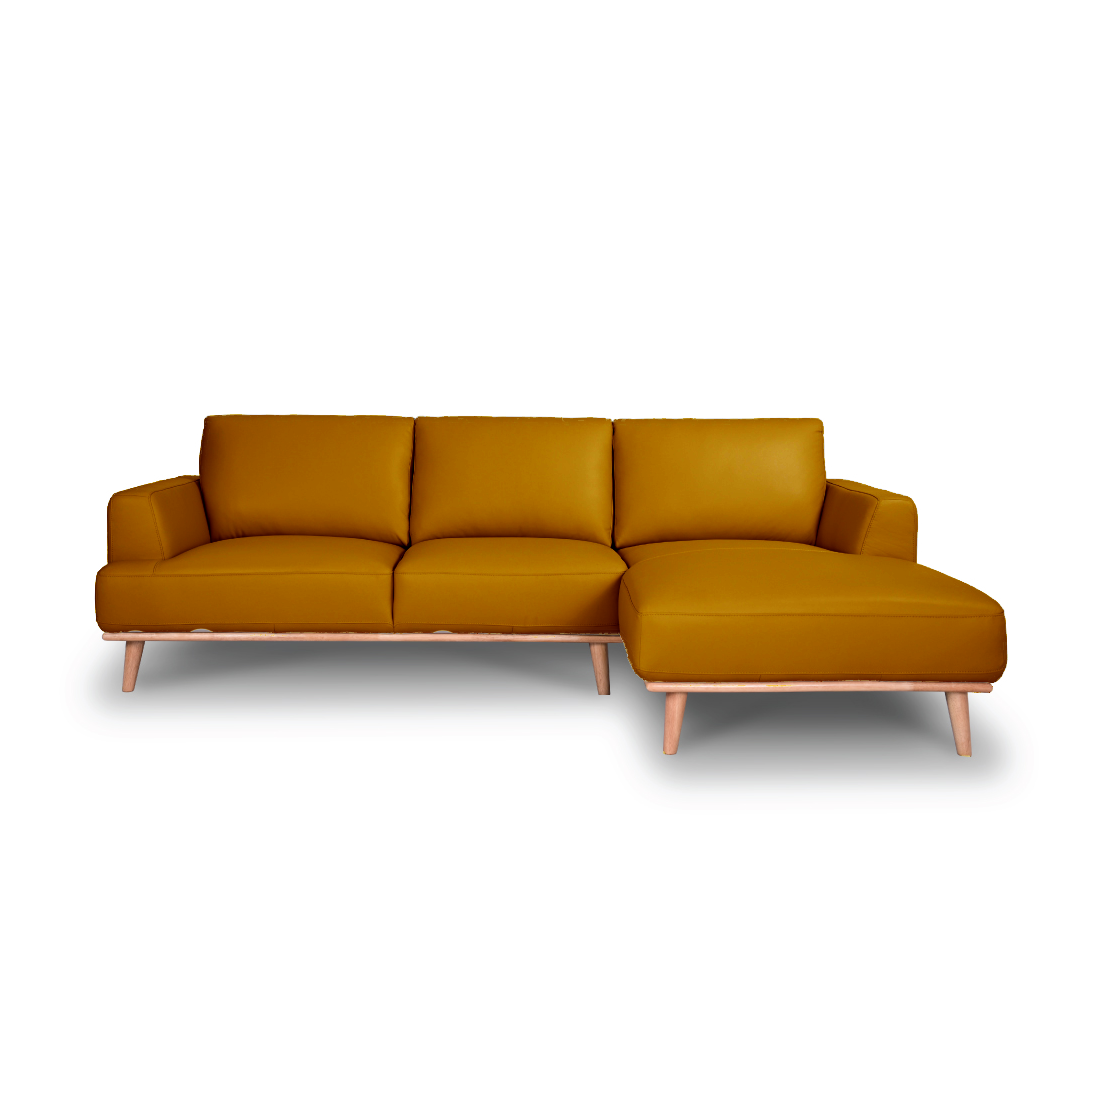 Stanford Tan Leather Chaise Lounge